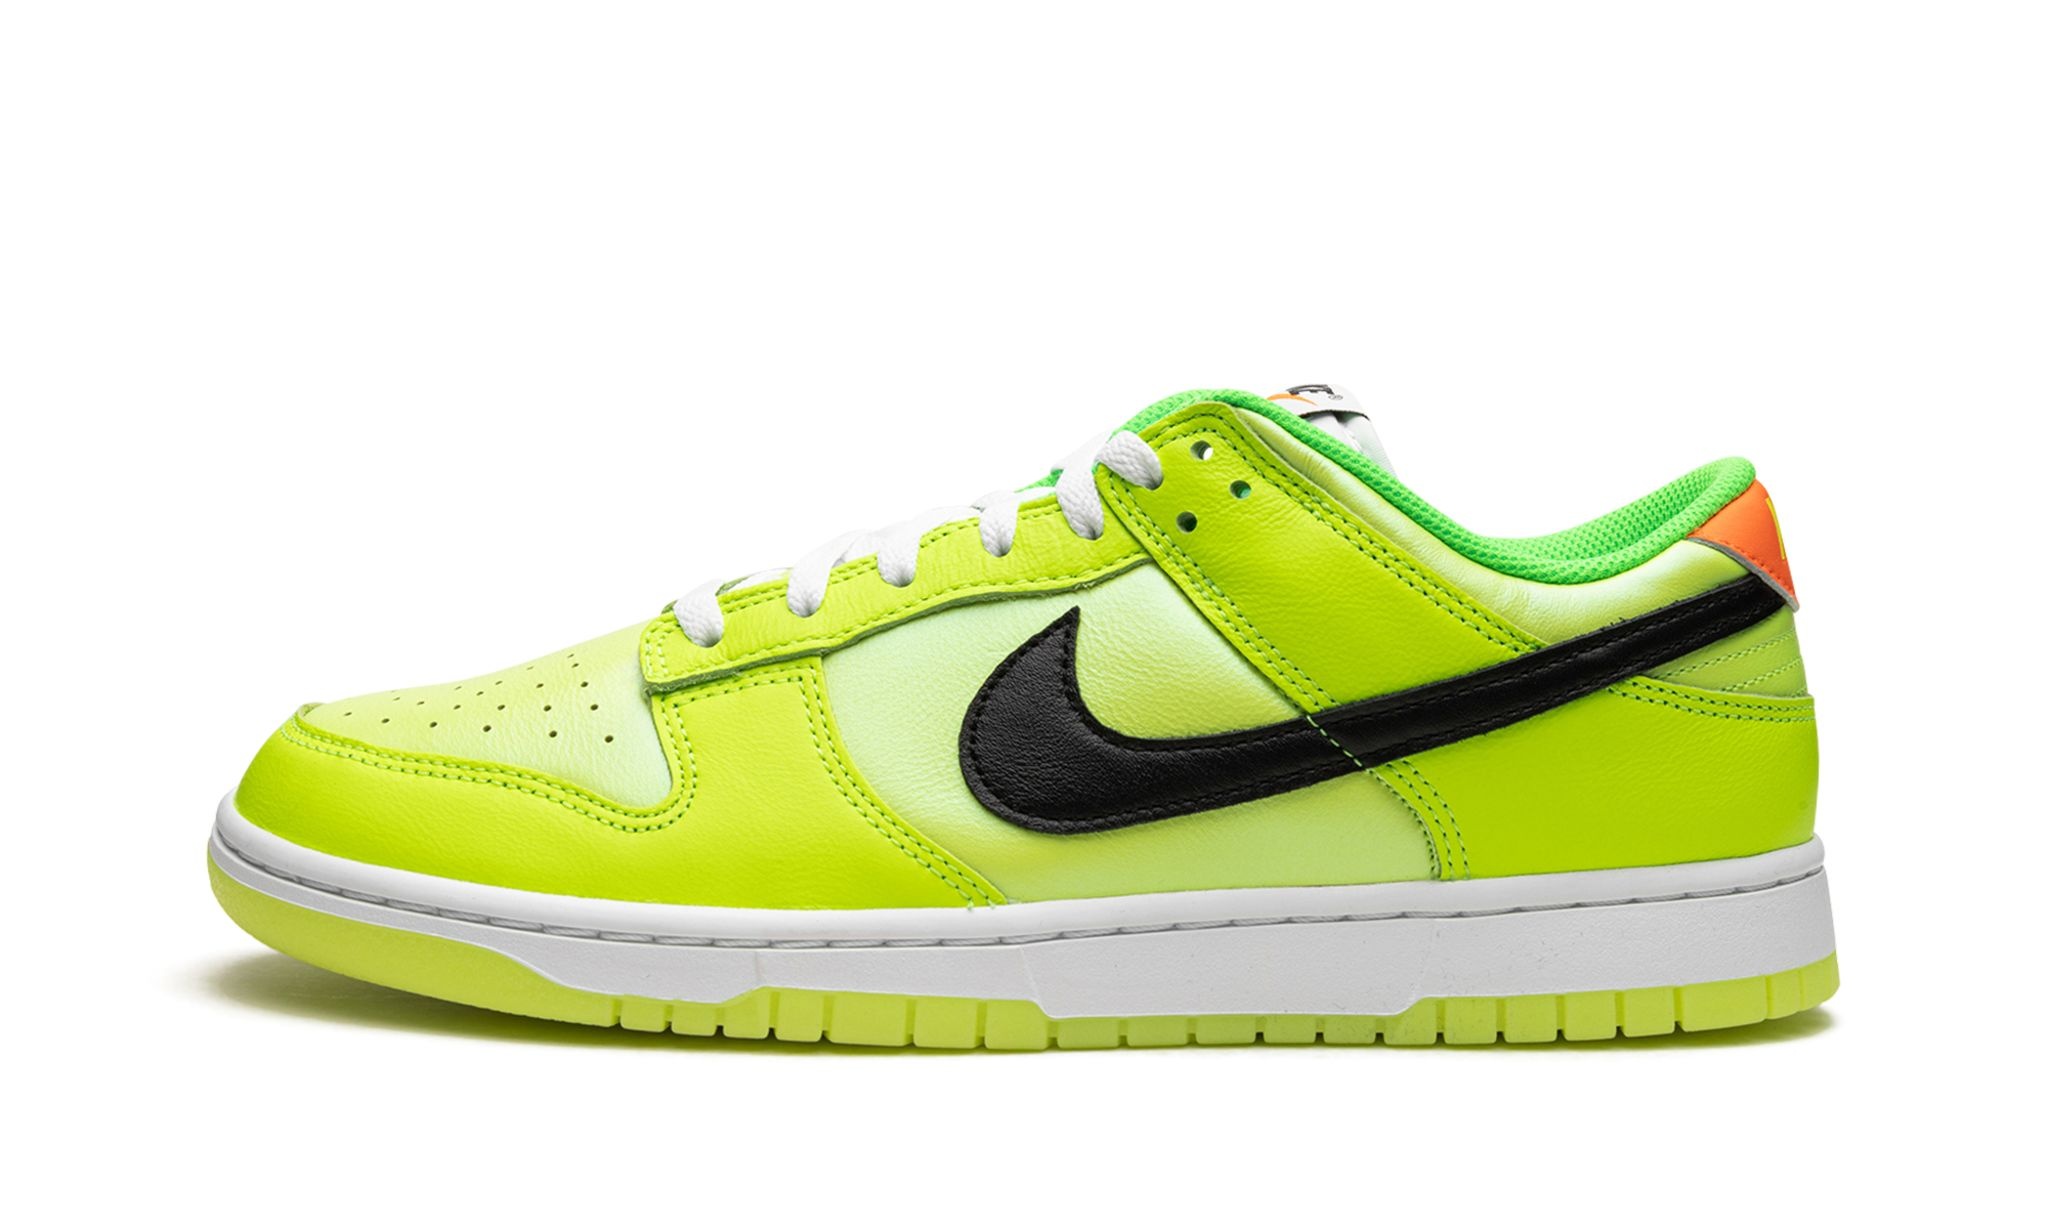 Dunk Low "Glow in the Dark" - 1